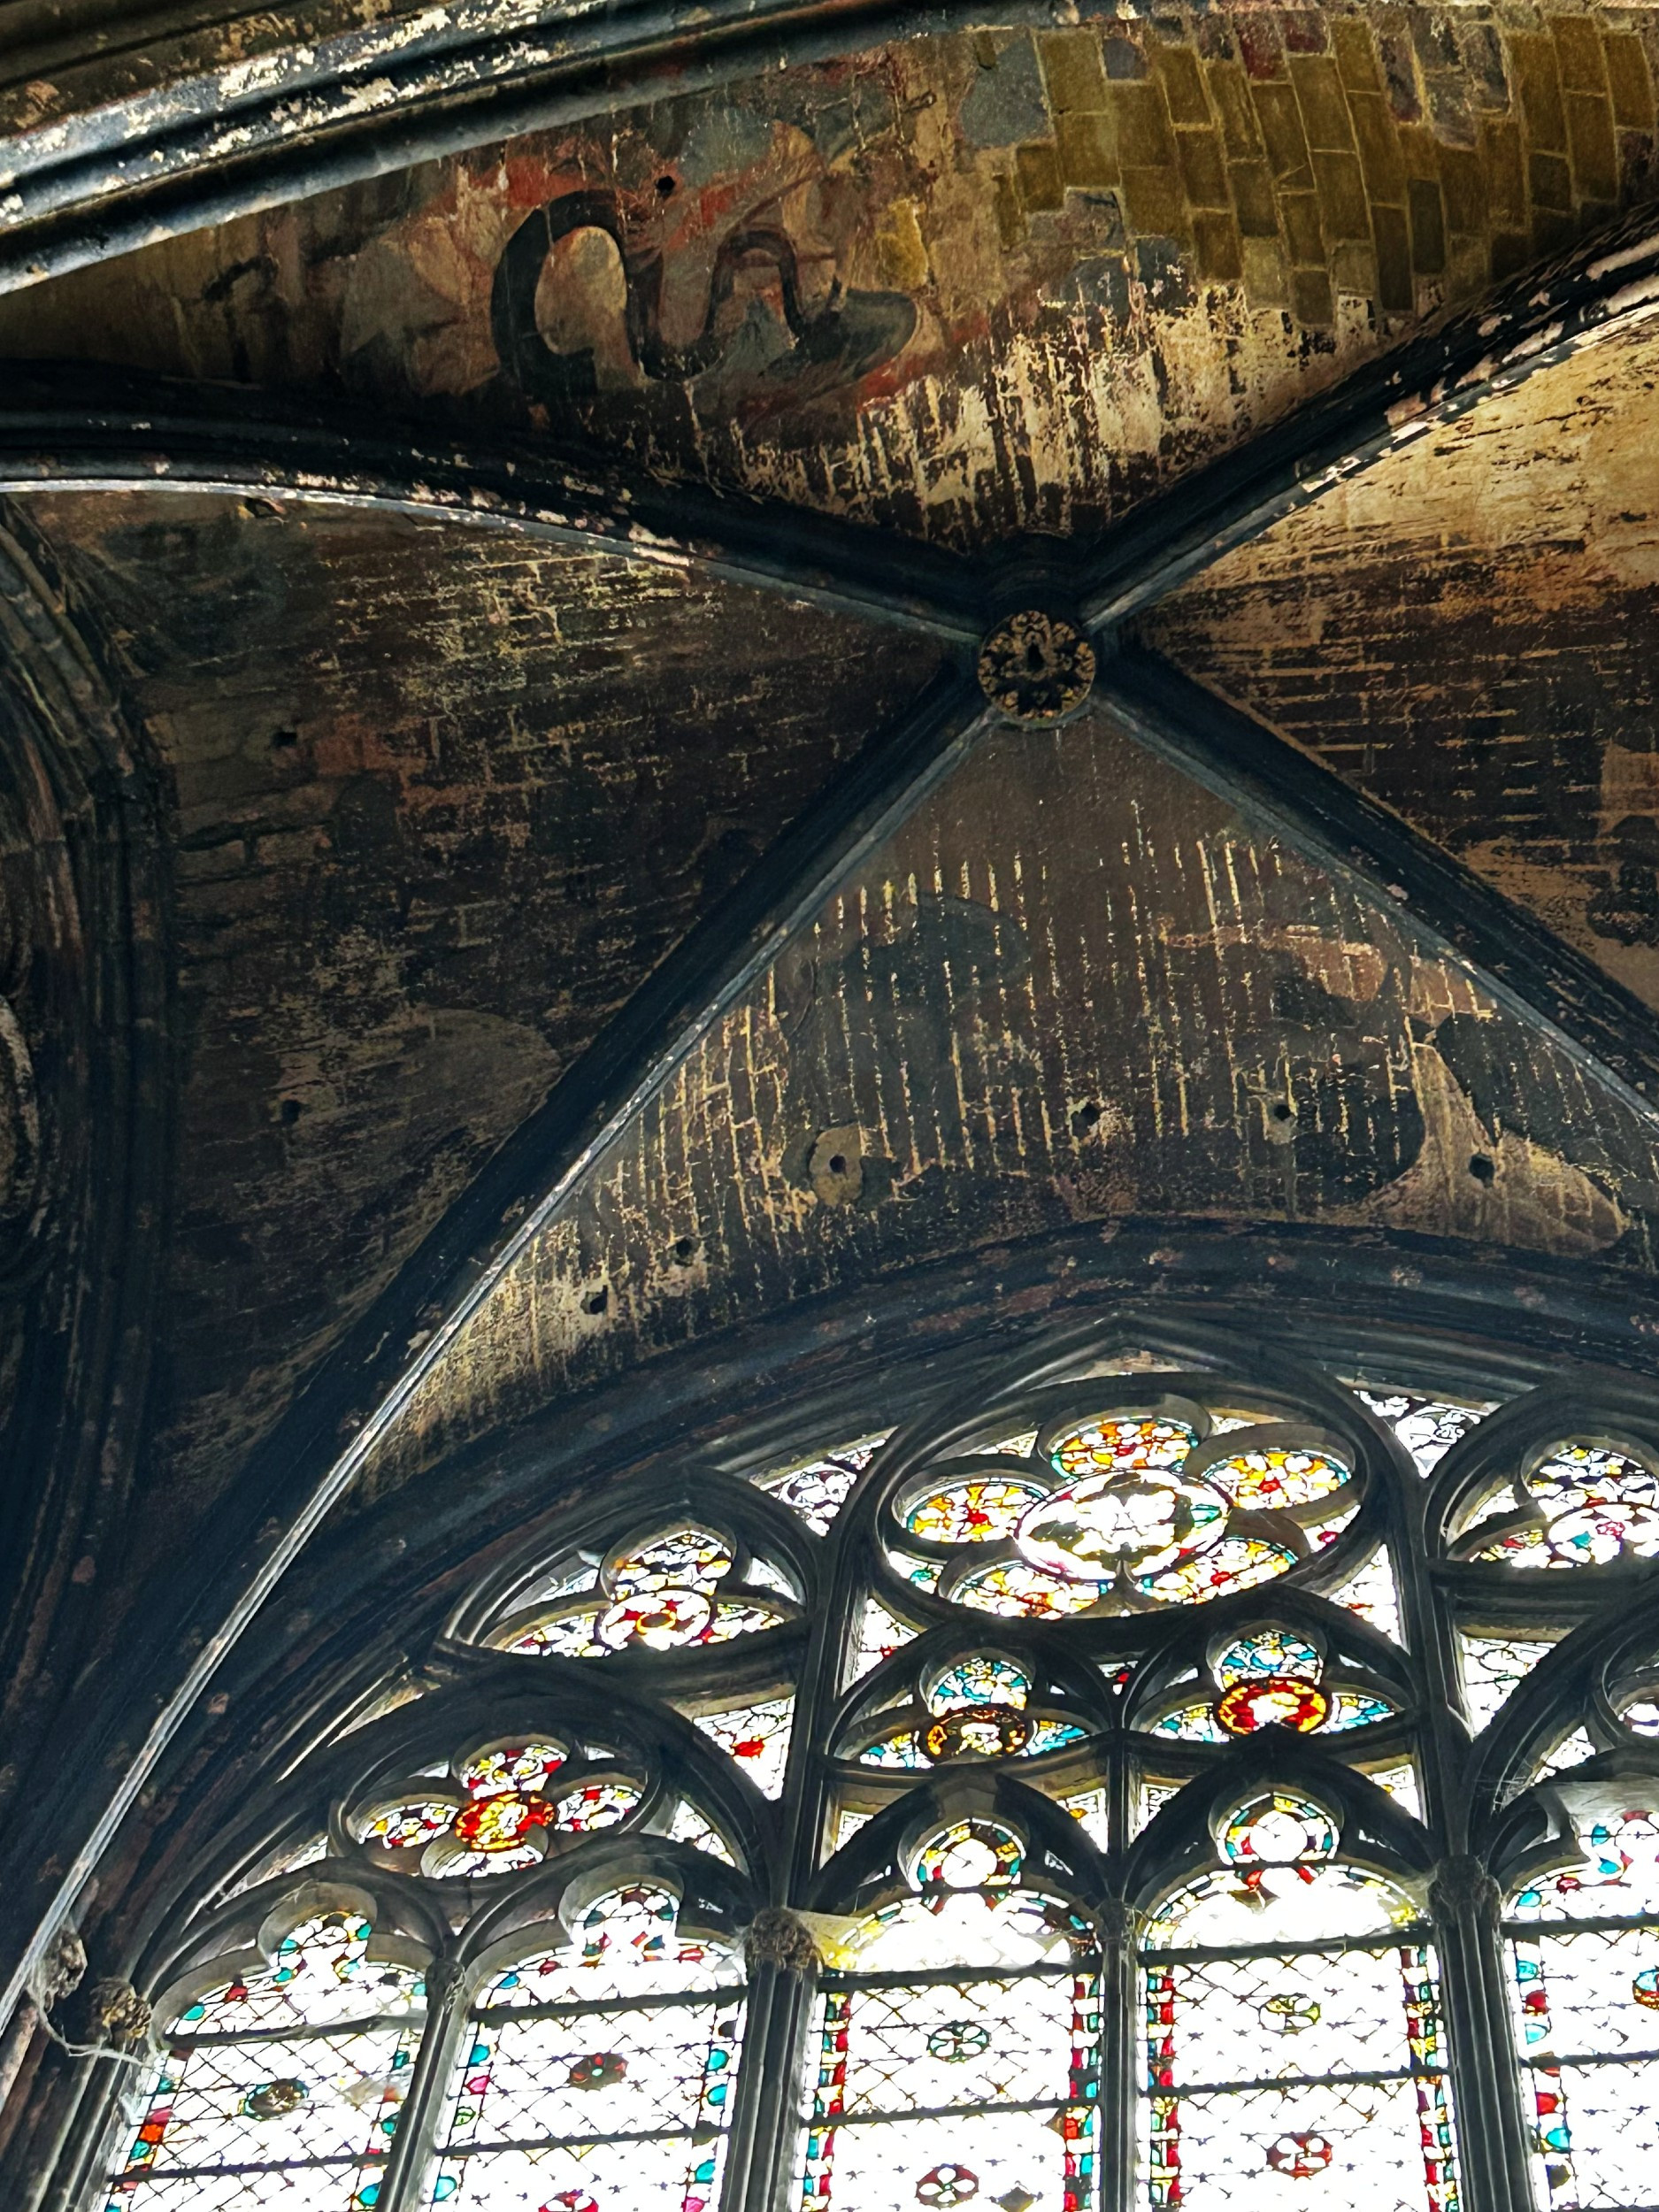 Gothic arched ceiling with fresco and stained glass window